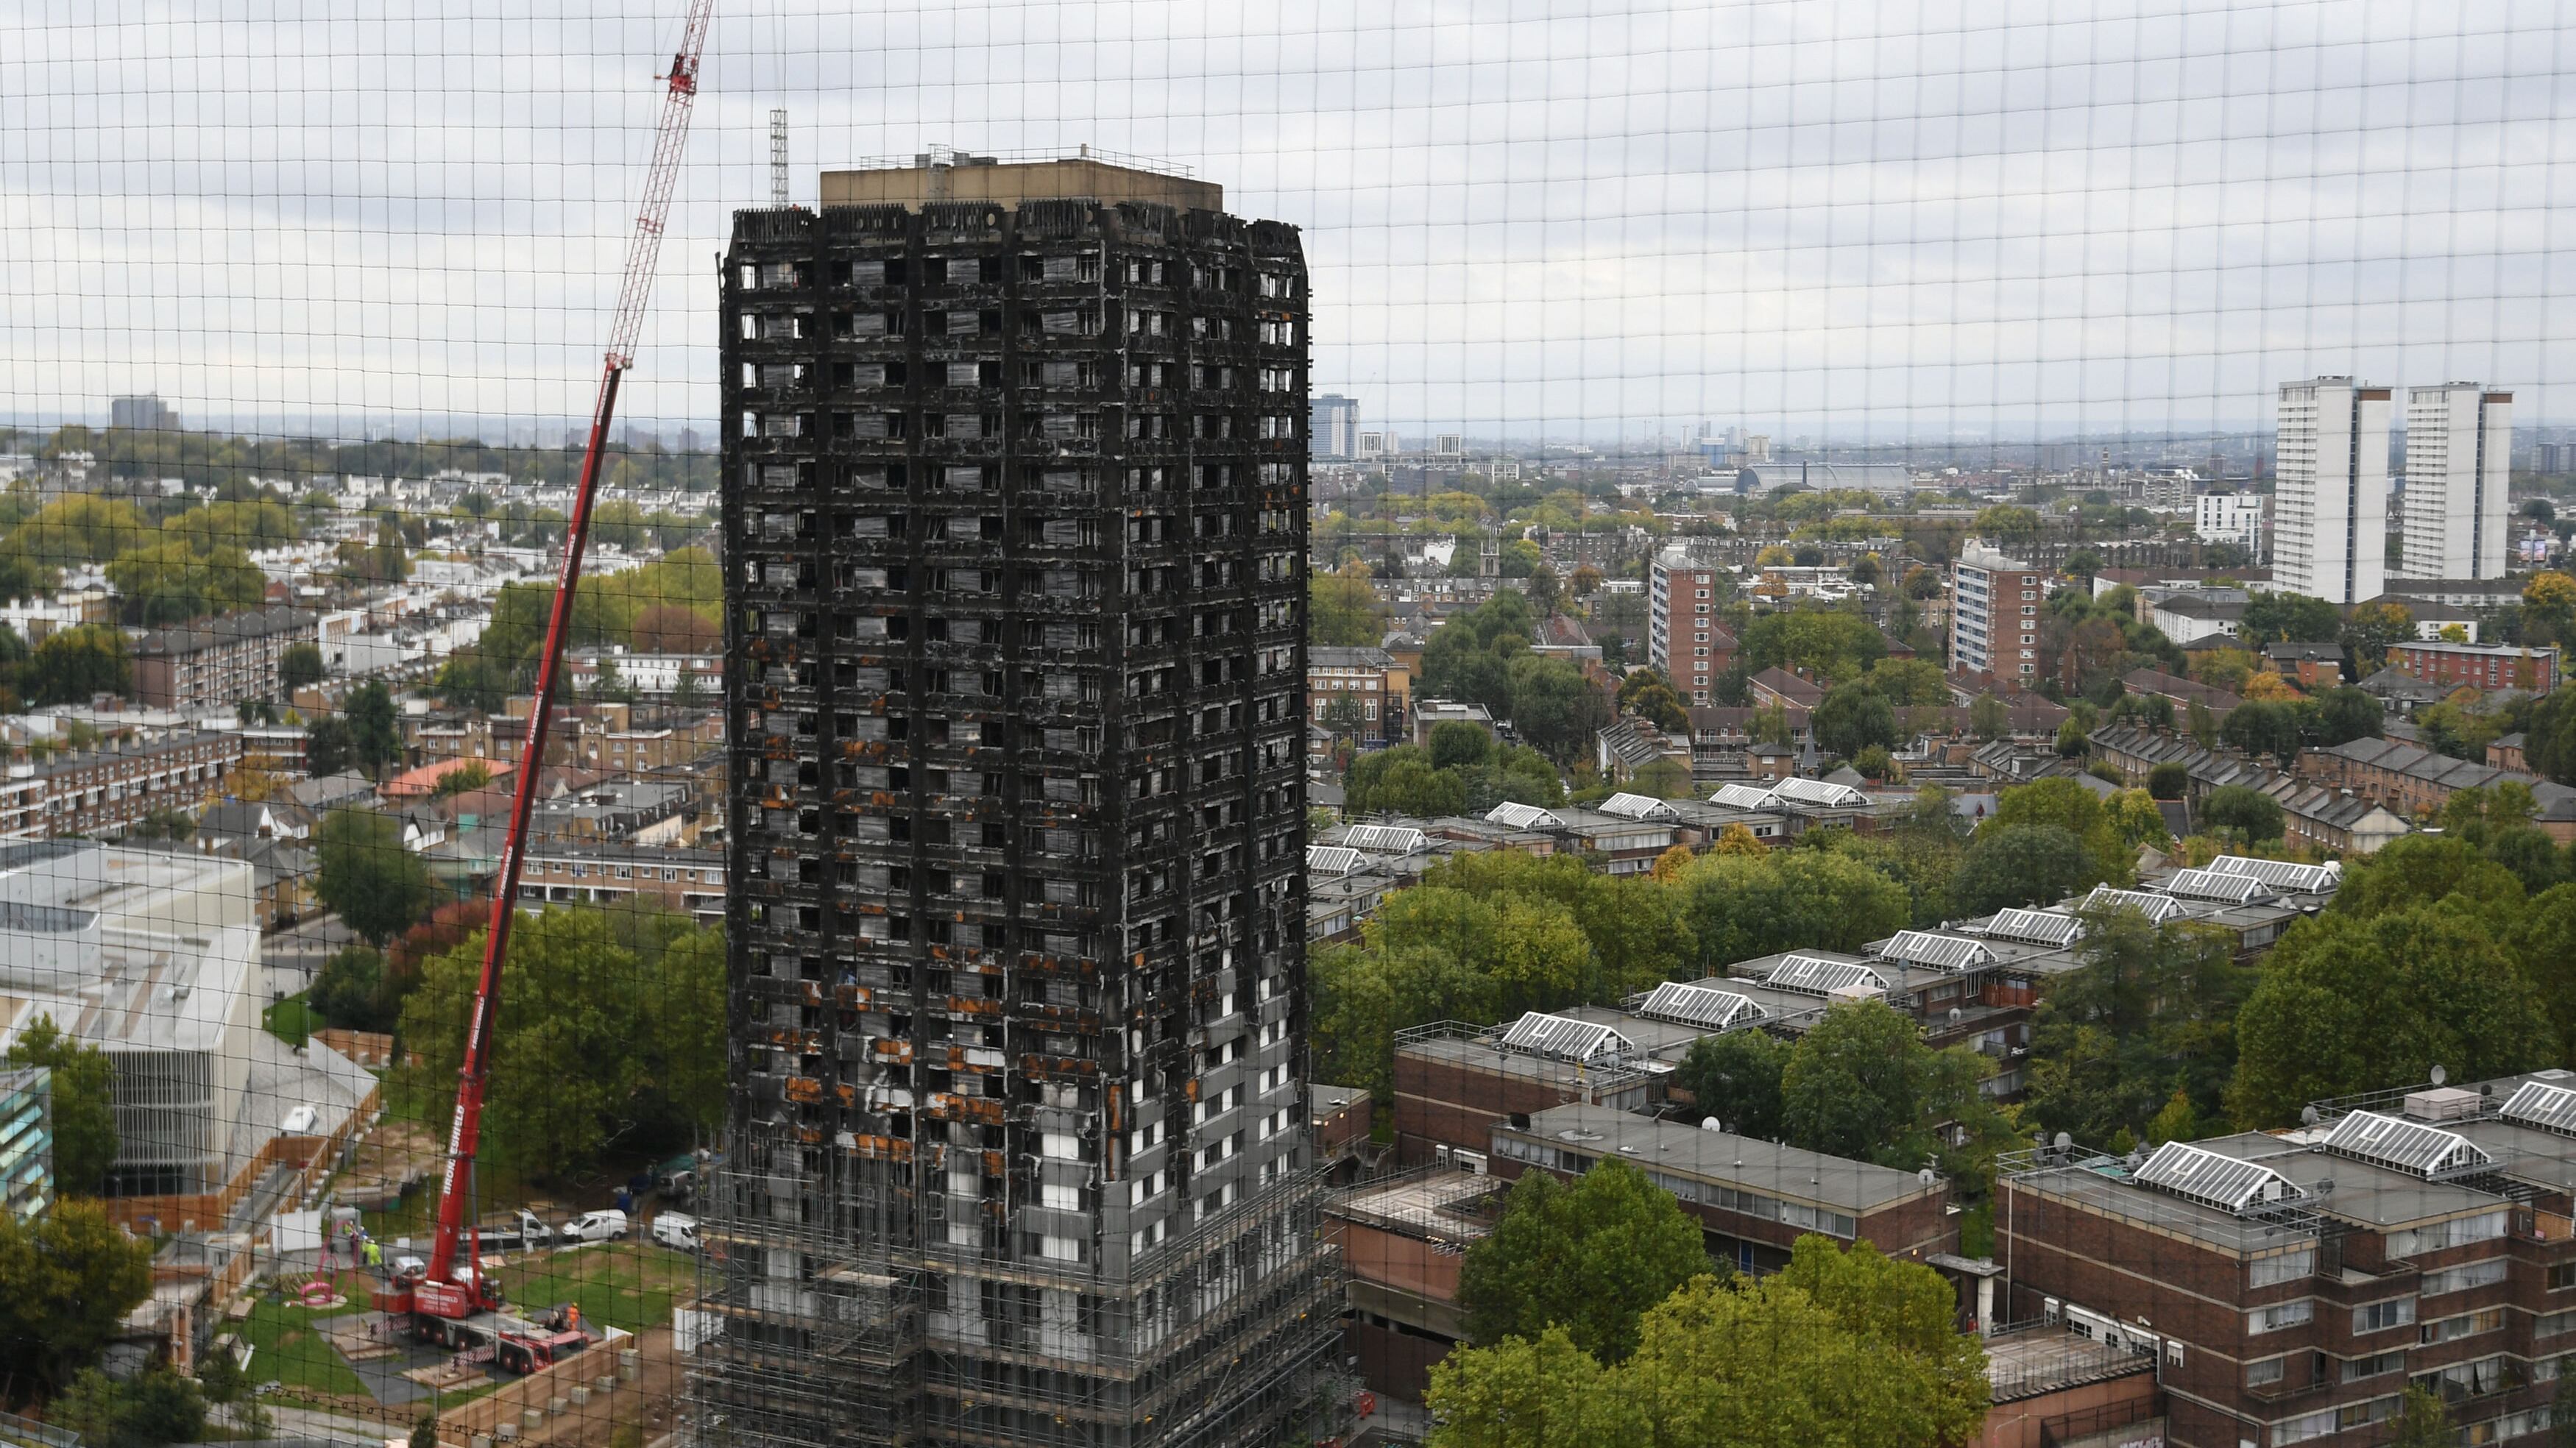 It will be nearly a decade on from the 2017 Grenfell Tower fire before any potential criminal charges are brought.